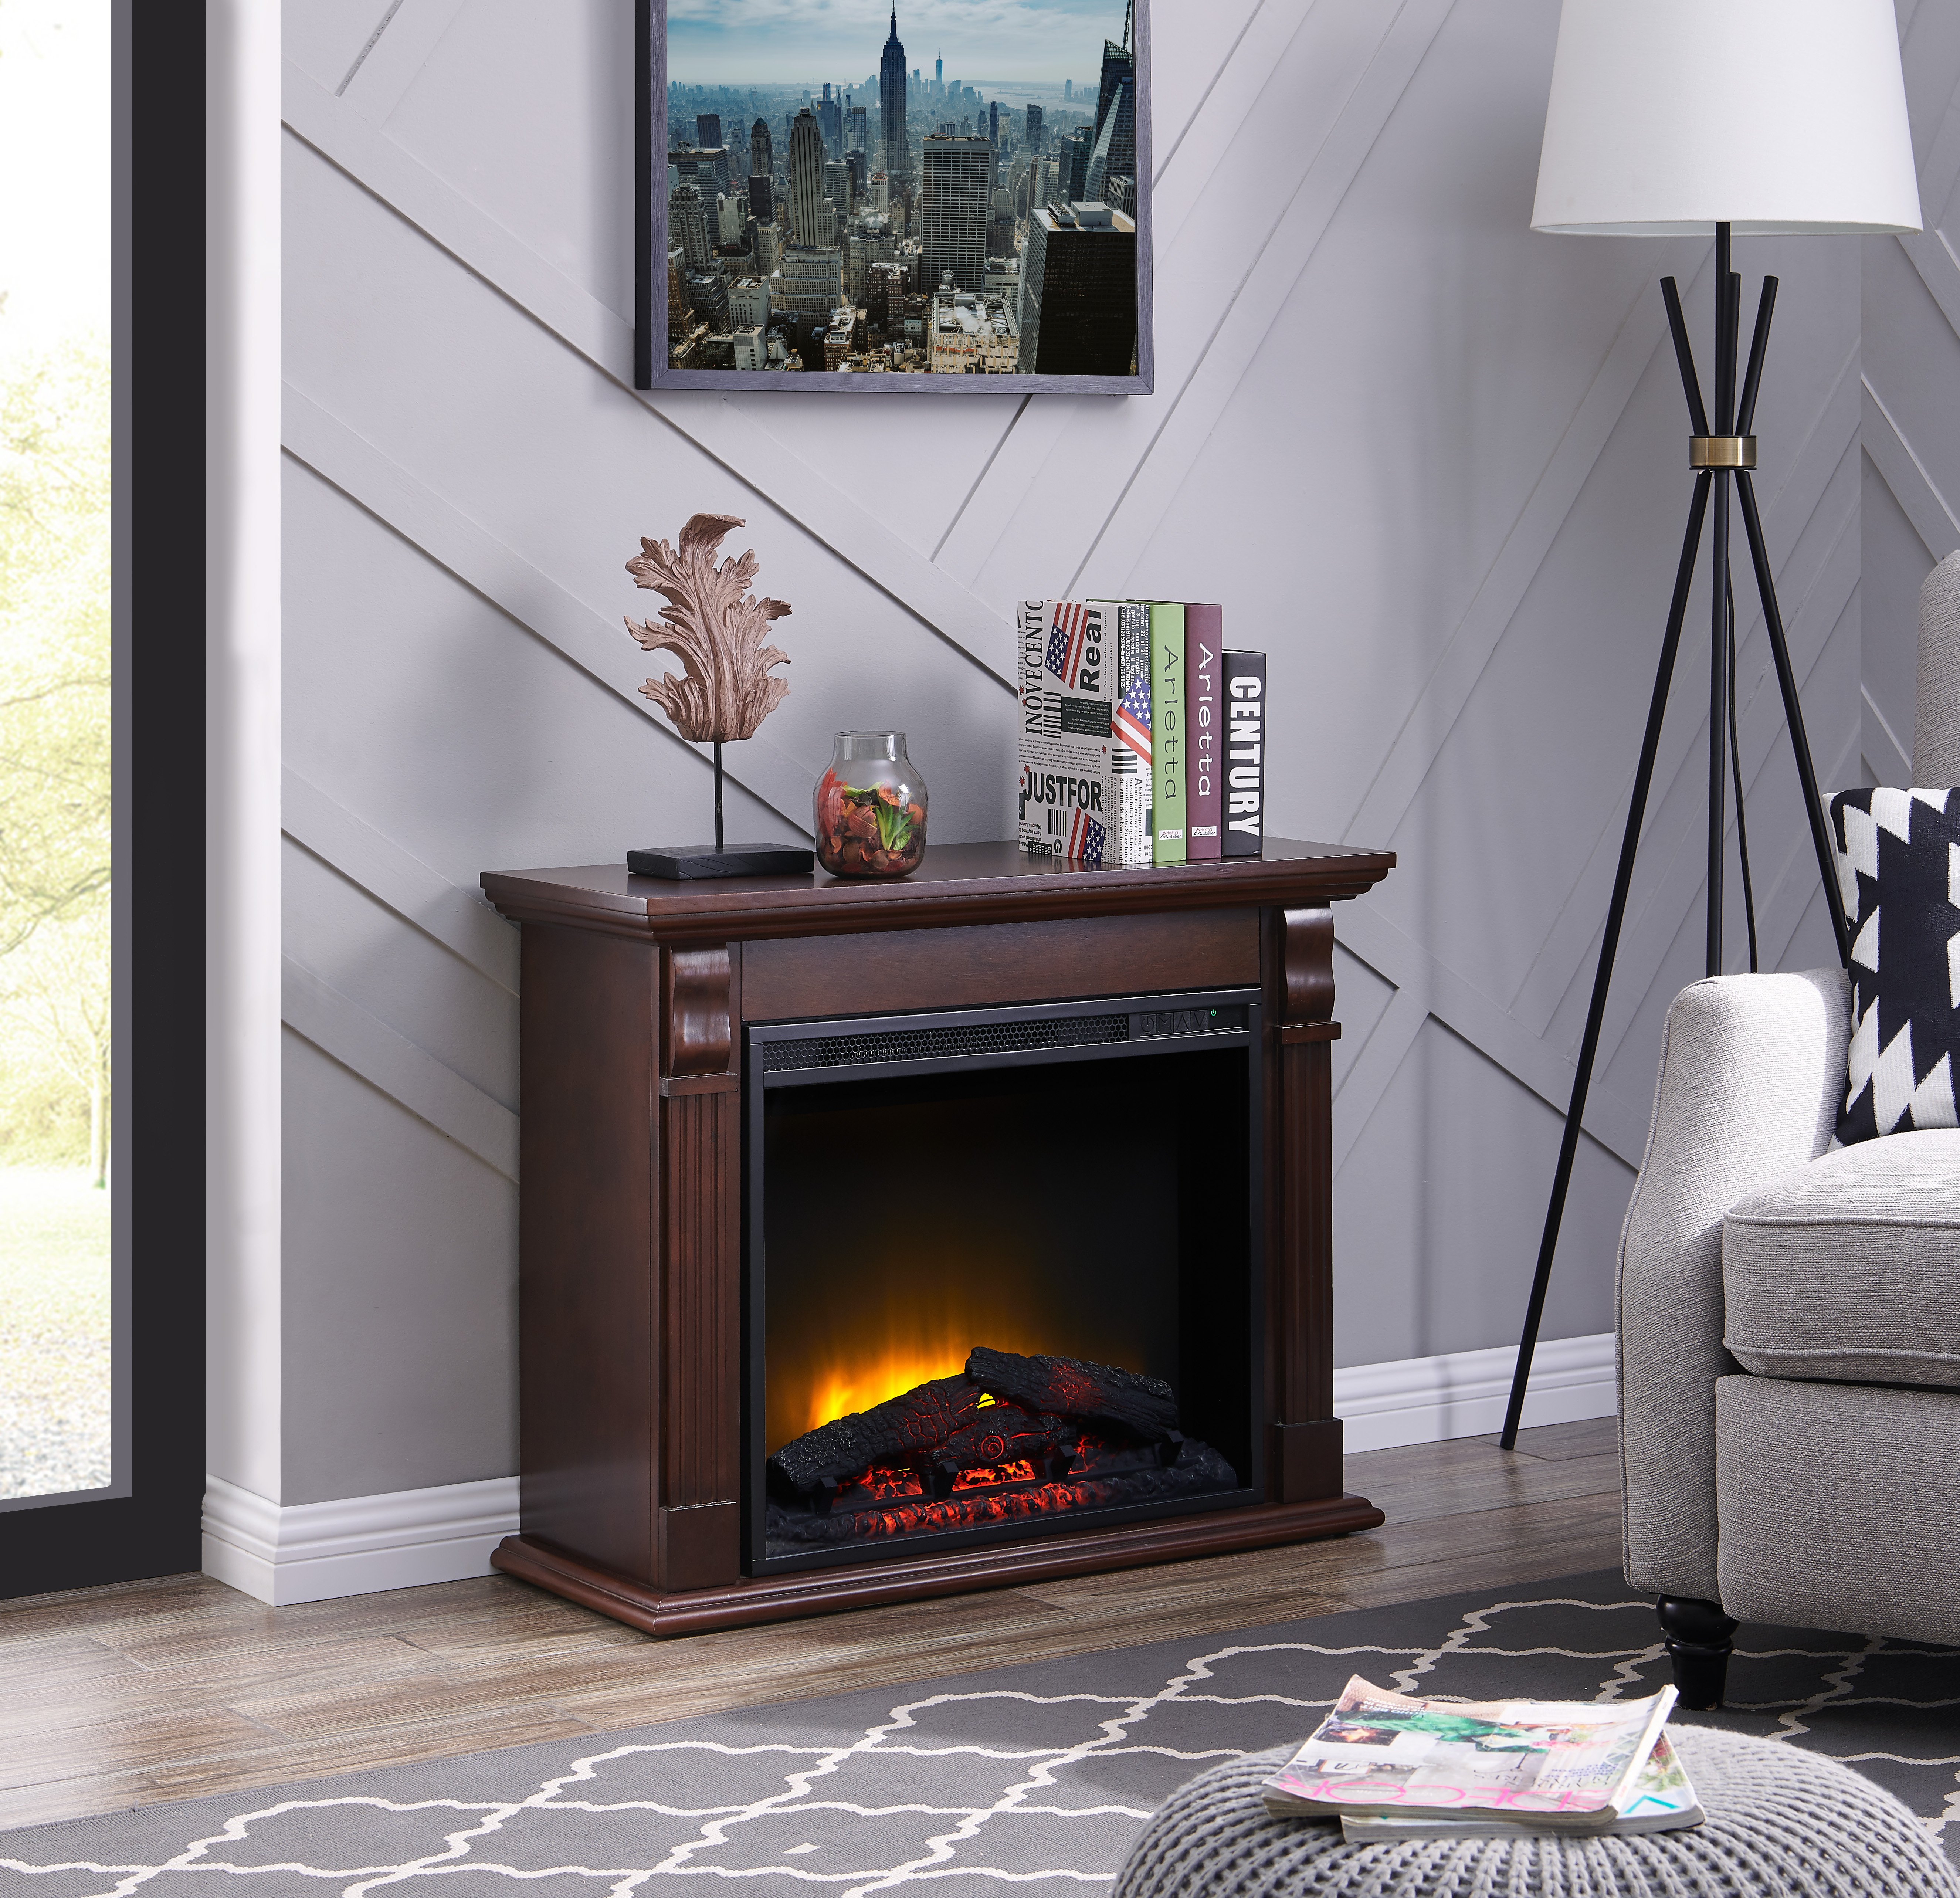 36 Inch Fireplace Insert Fresh Bold Flame 33 46 Inch Electric Fireplace In Chestnut